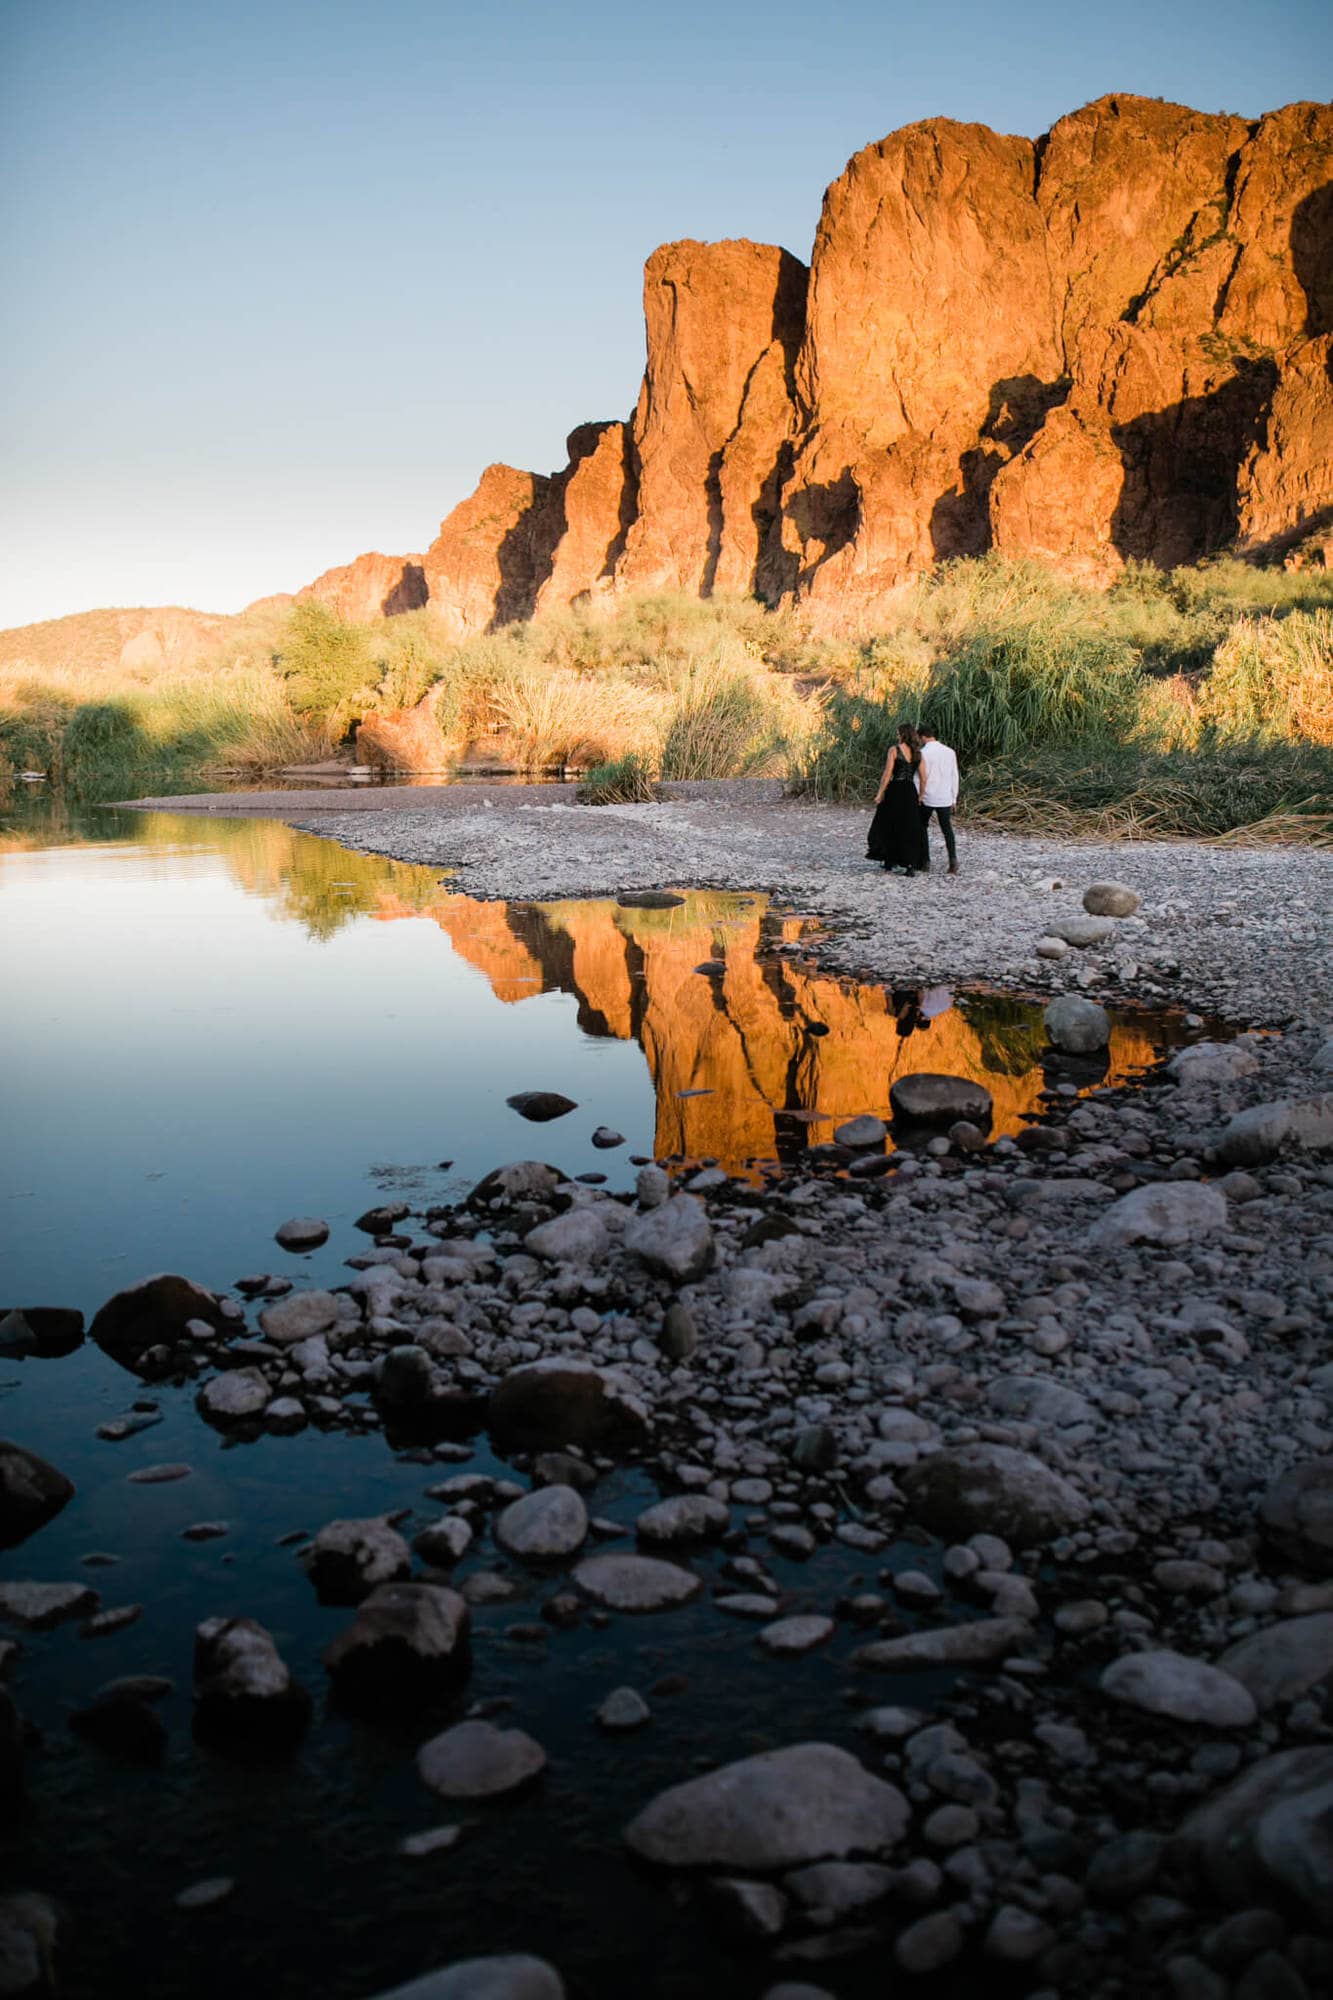 As an arizona elopement photographer I love exploring the desert with my couples. This sunset desert oasis shoot with Nicole + Logan was a freaking dream